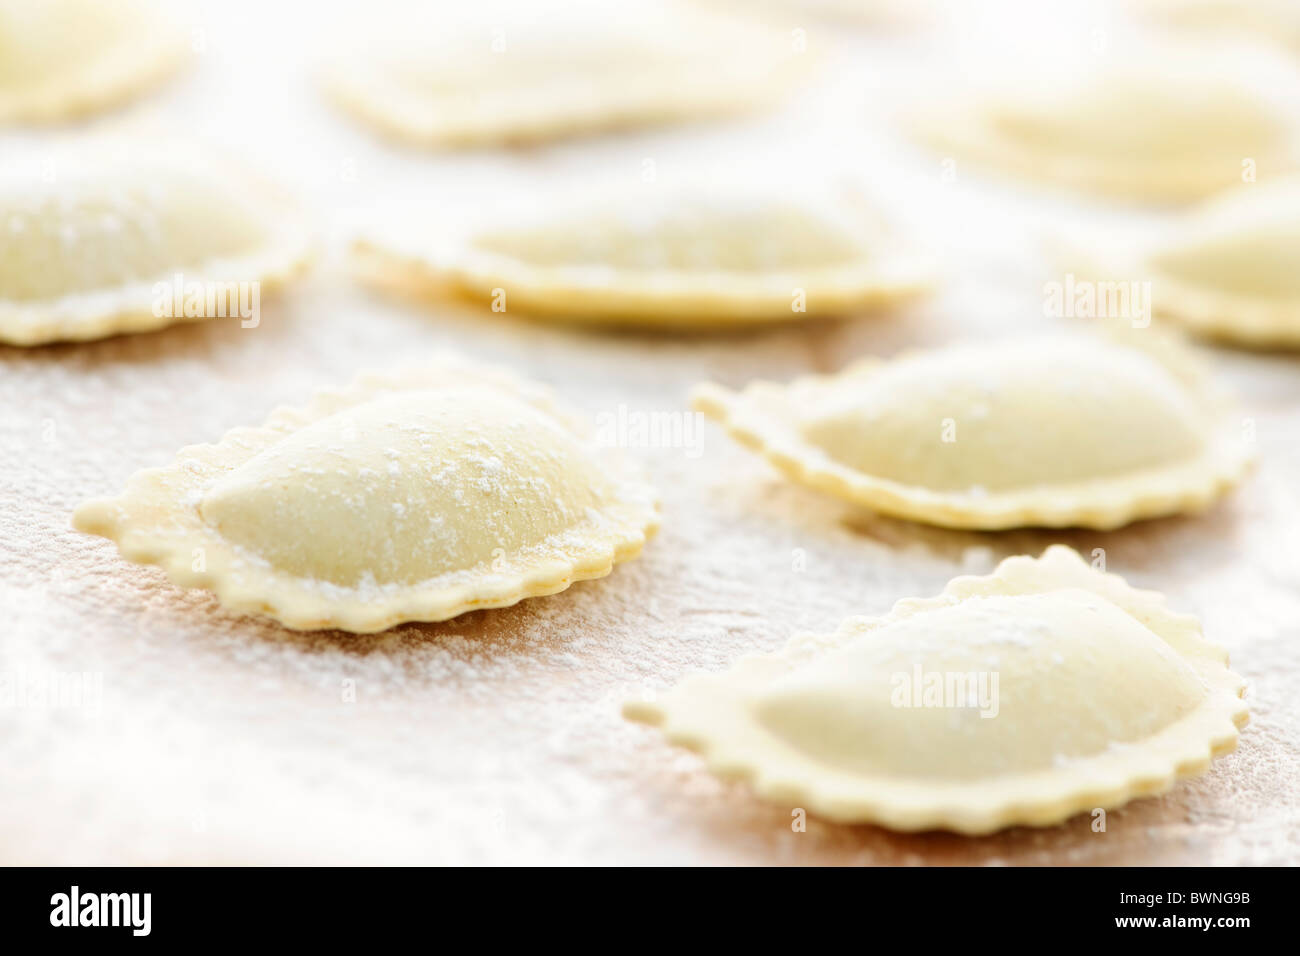 Uncooked ravioli pasta prepared and ready for cooking Stock Photo